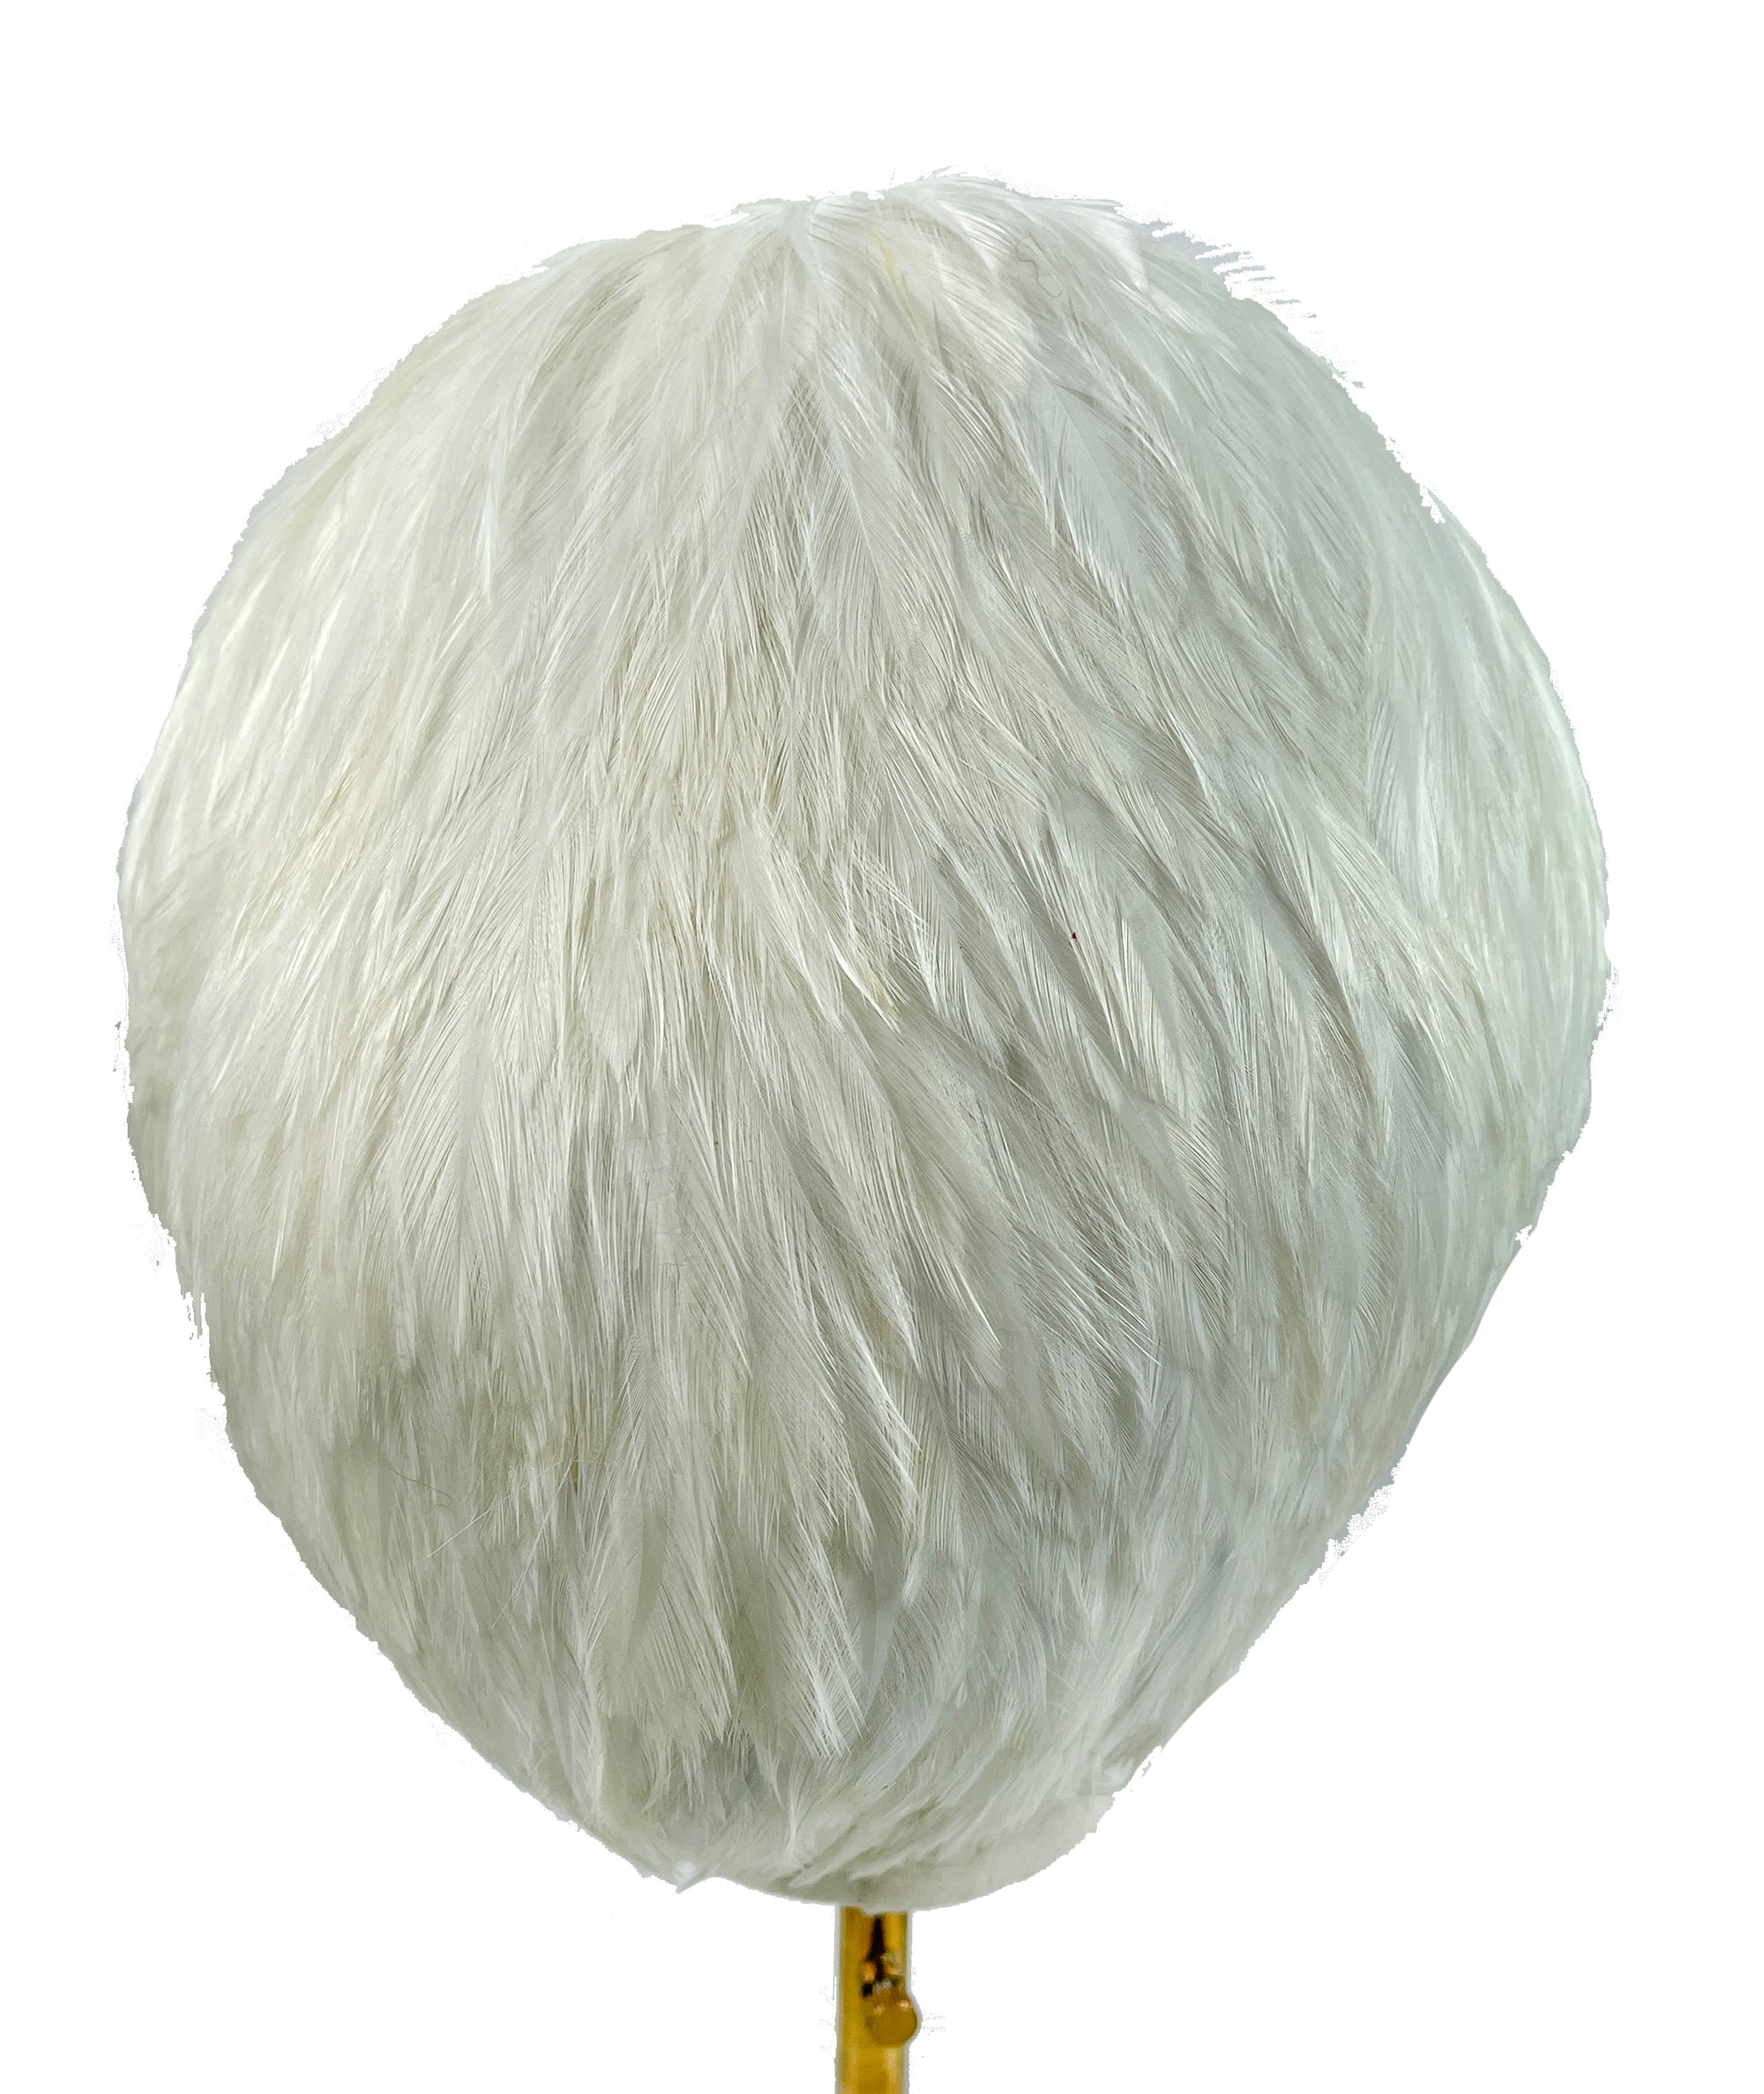 Vintage White Feather Wig Cap by Mr D